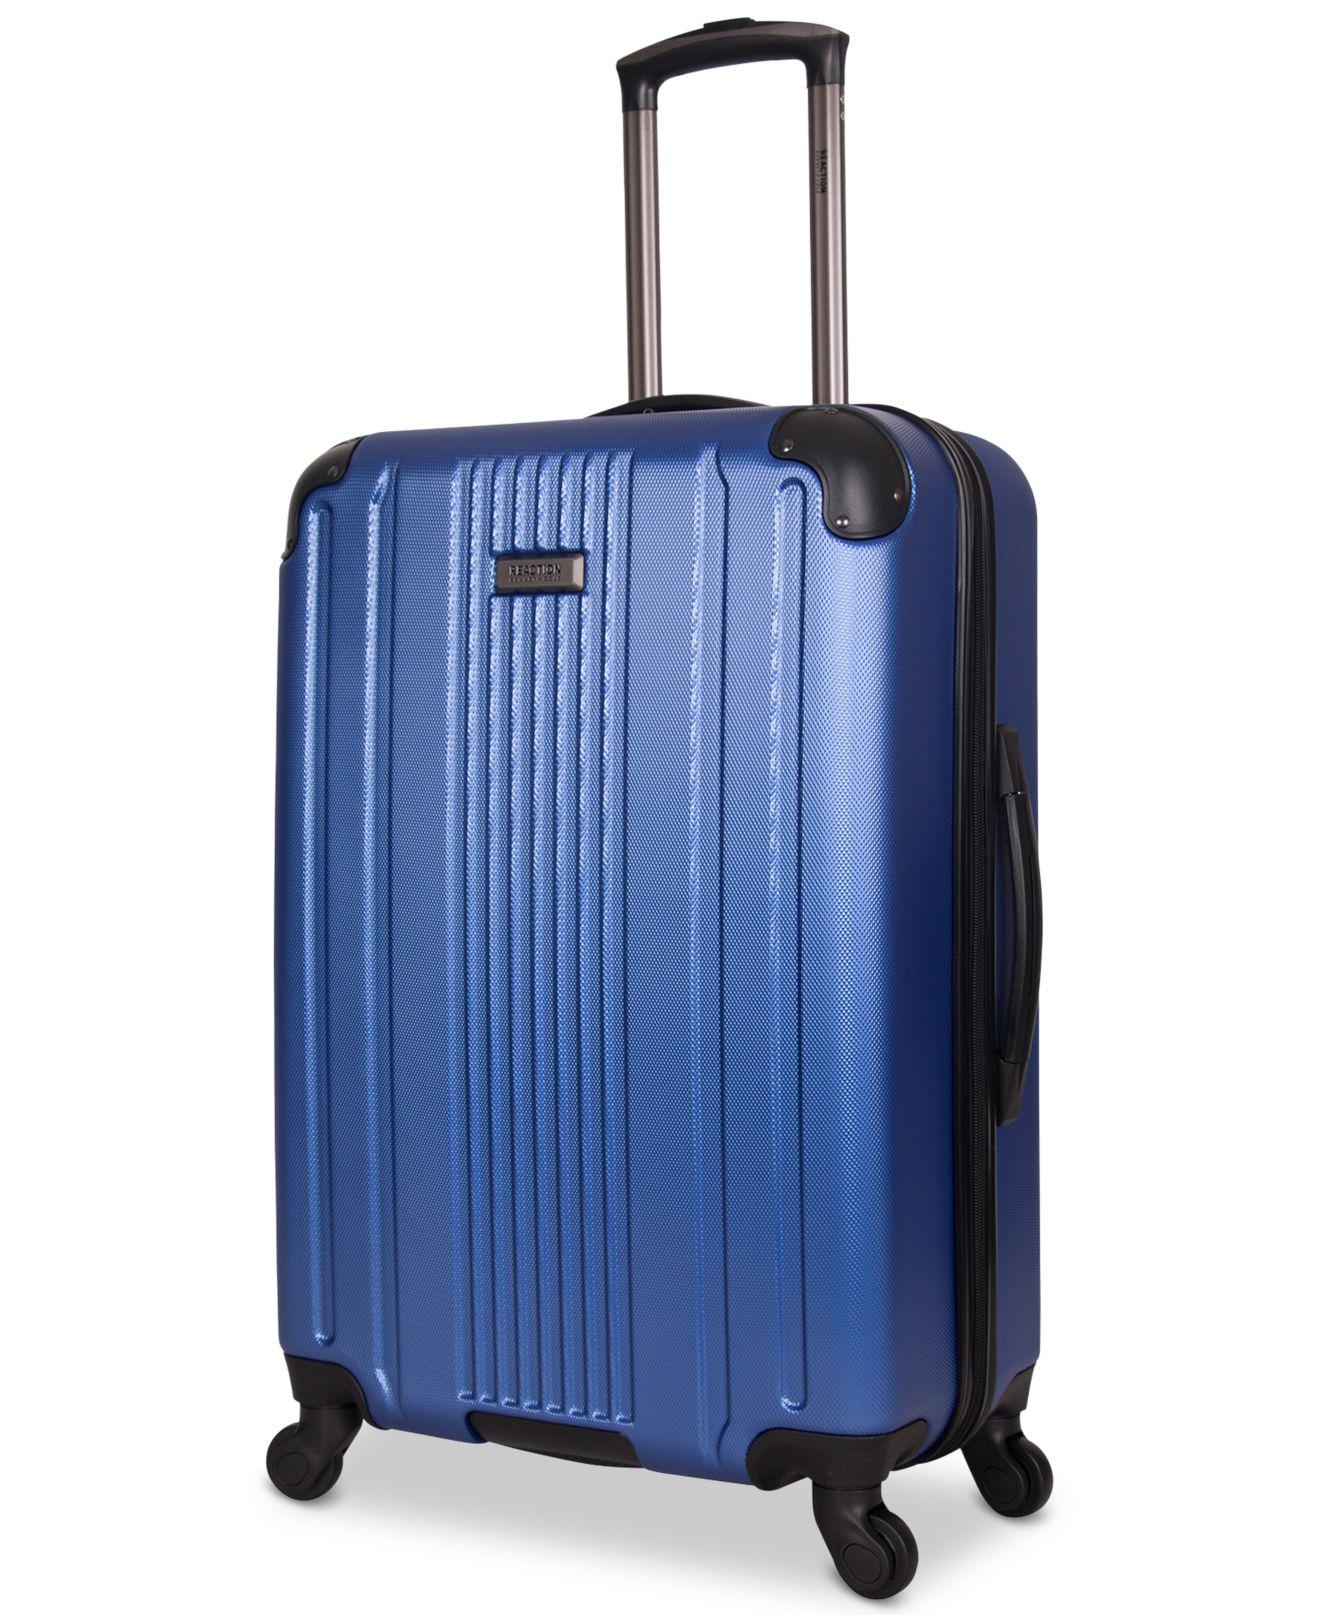 Kenneth Cole Reaction South Street 3-pc. Hardside Spinner Luggage Set ...